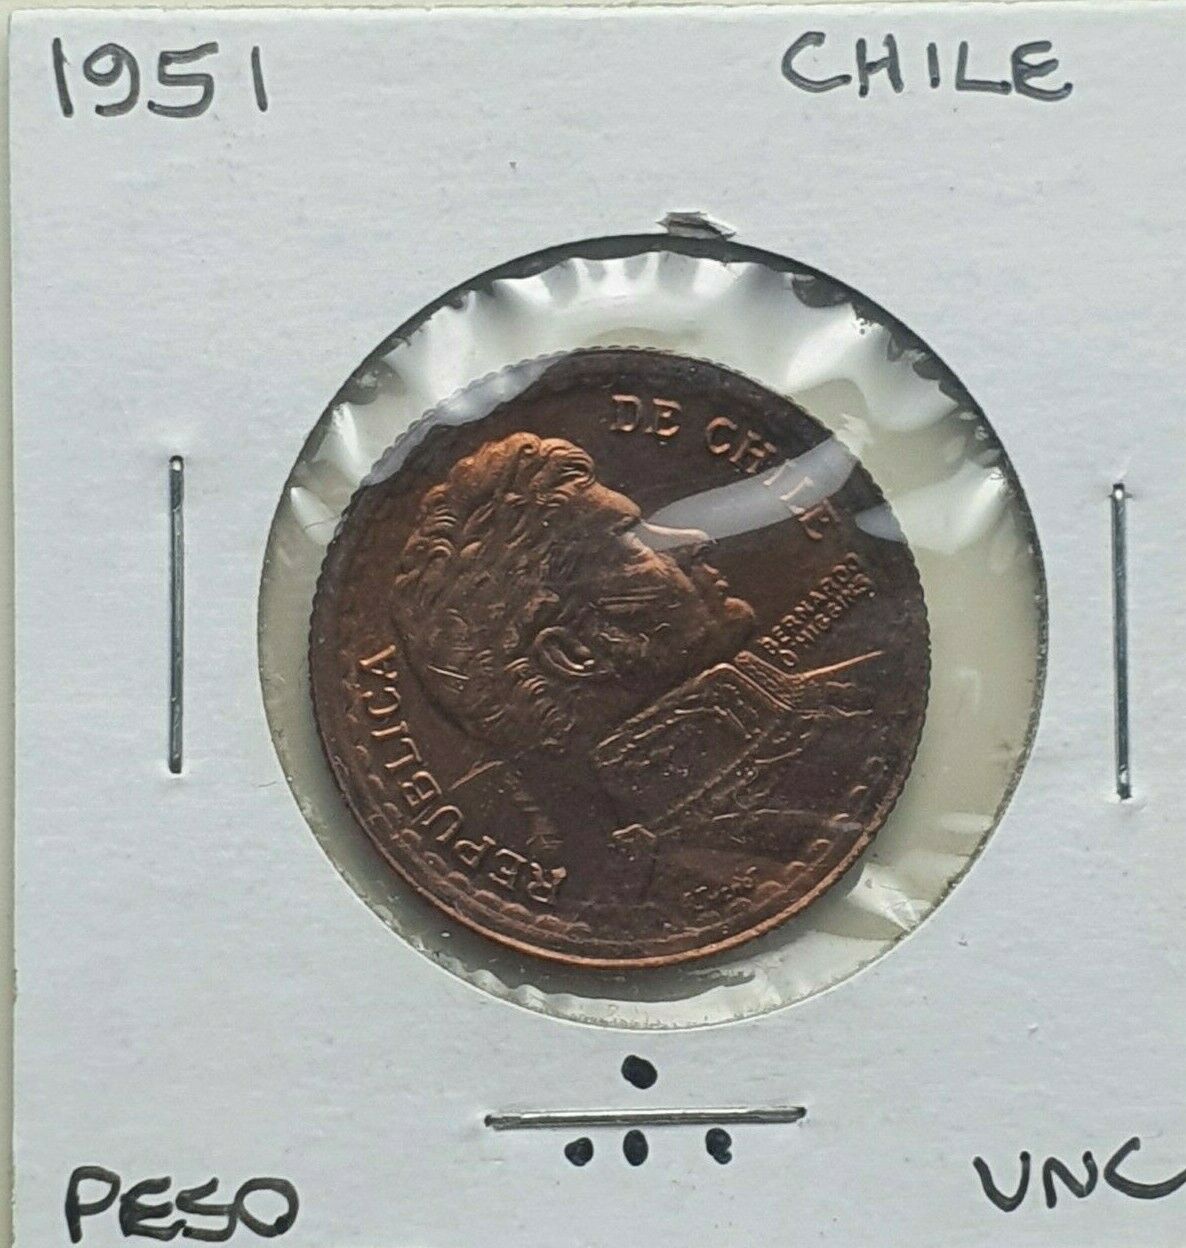 1951 Chile 1 peso coin uncirculated